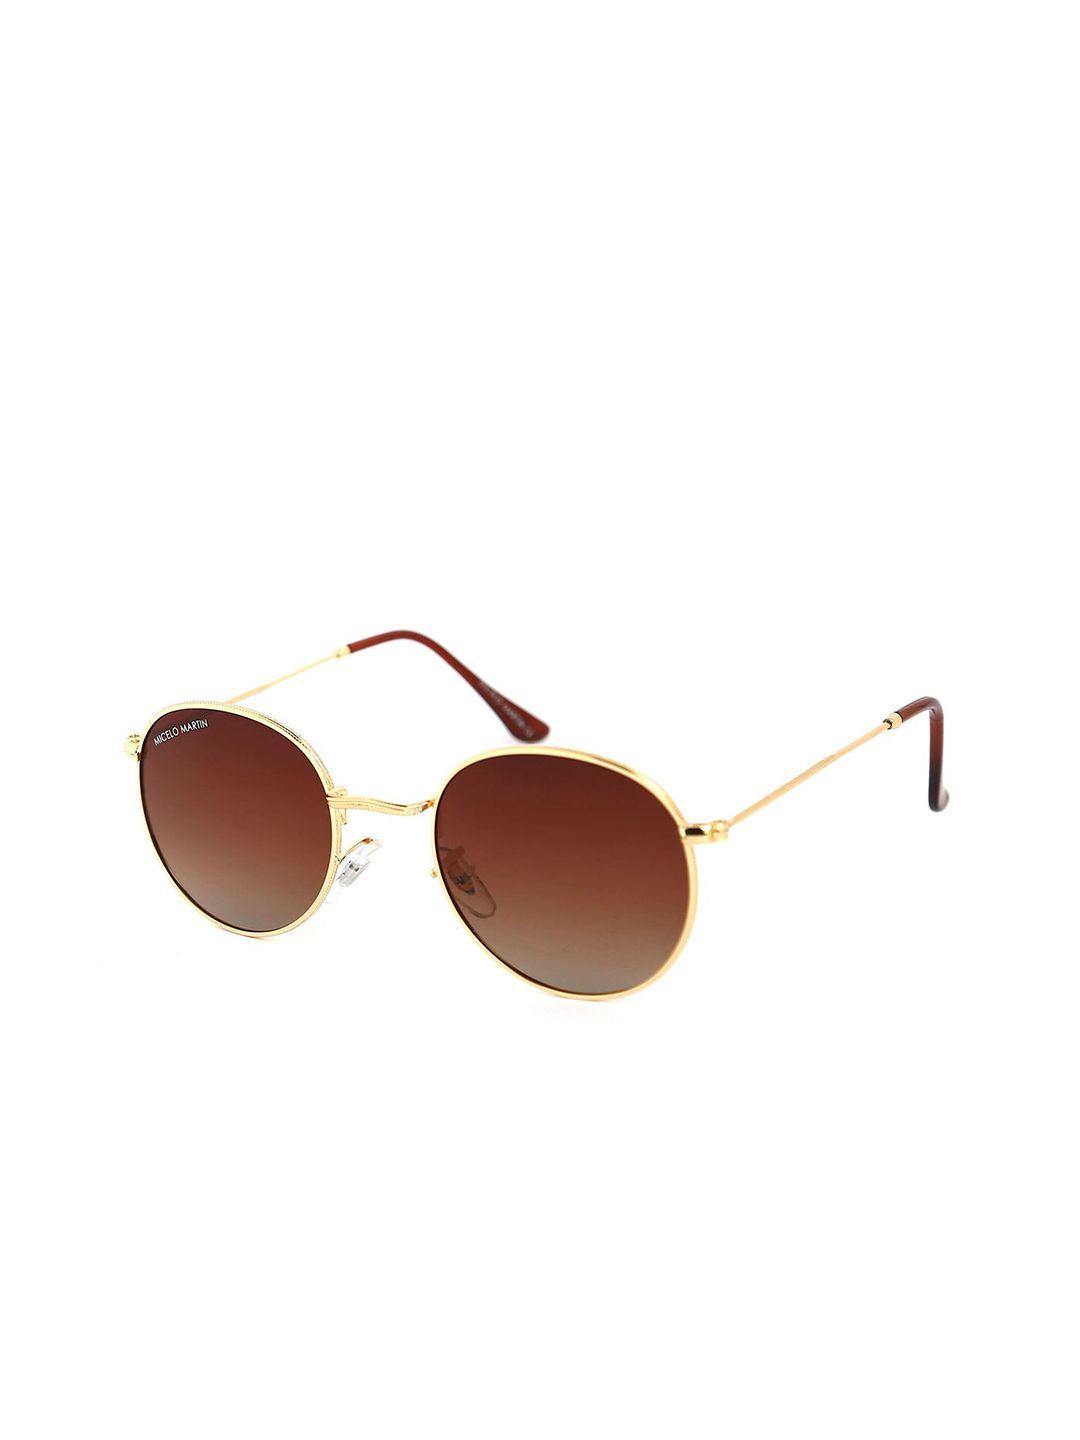 micelo martin unisex brown lens & gold-toned round sunglasses mm1004 c3